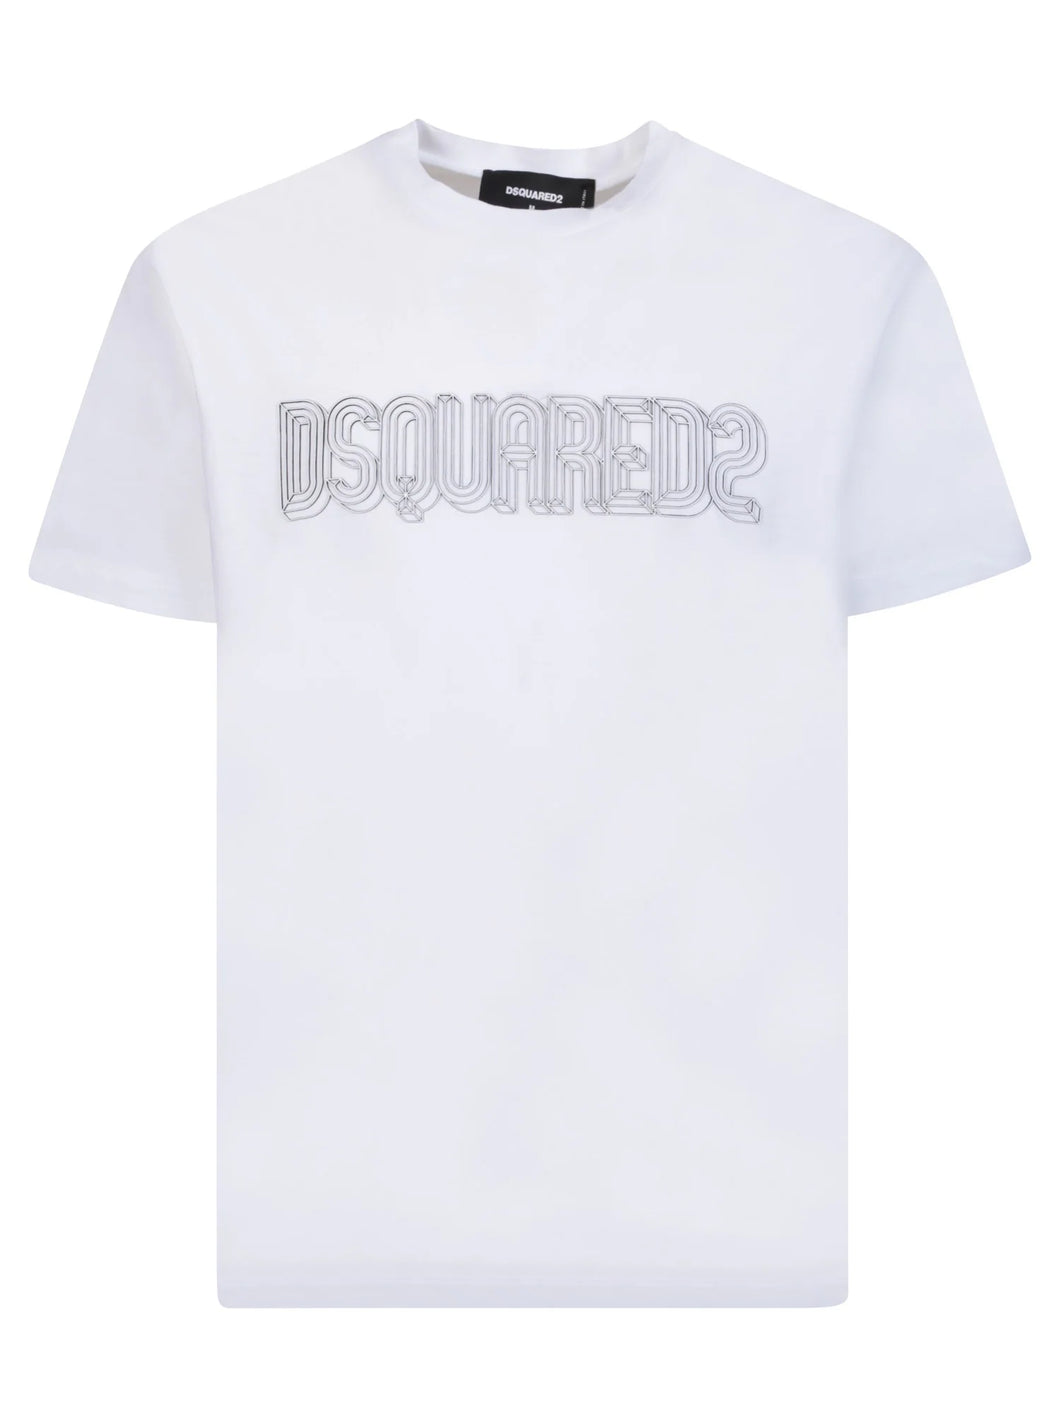 Dsquared2 T-Shirt New Collection FW 23/24